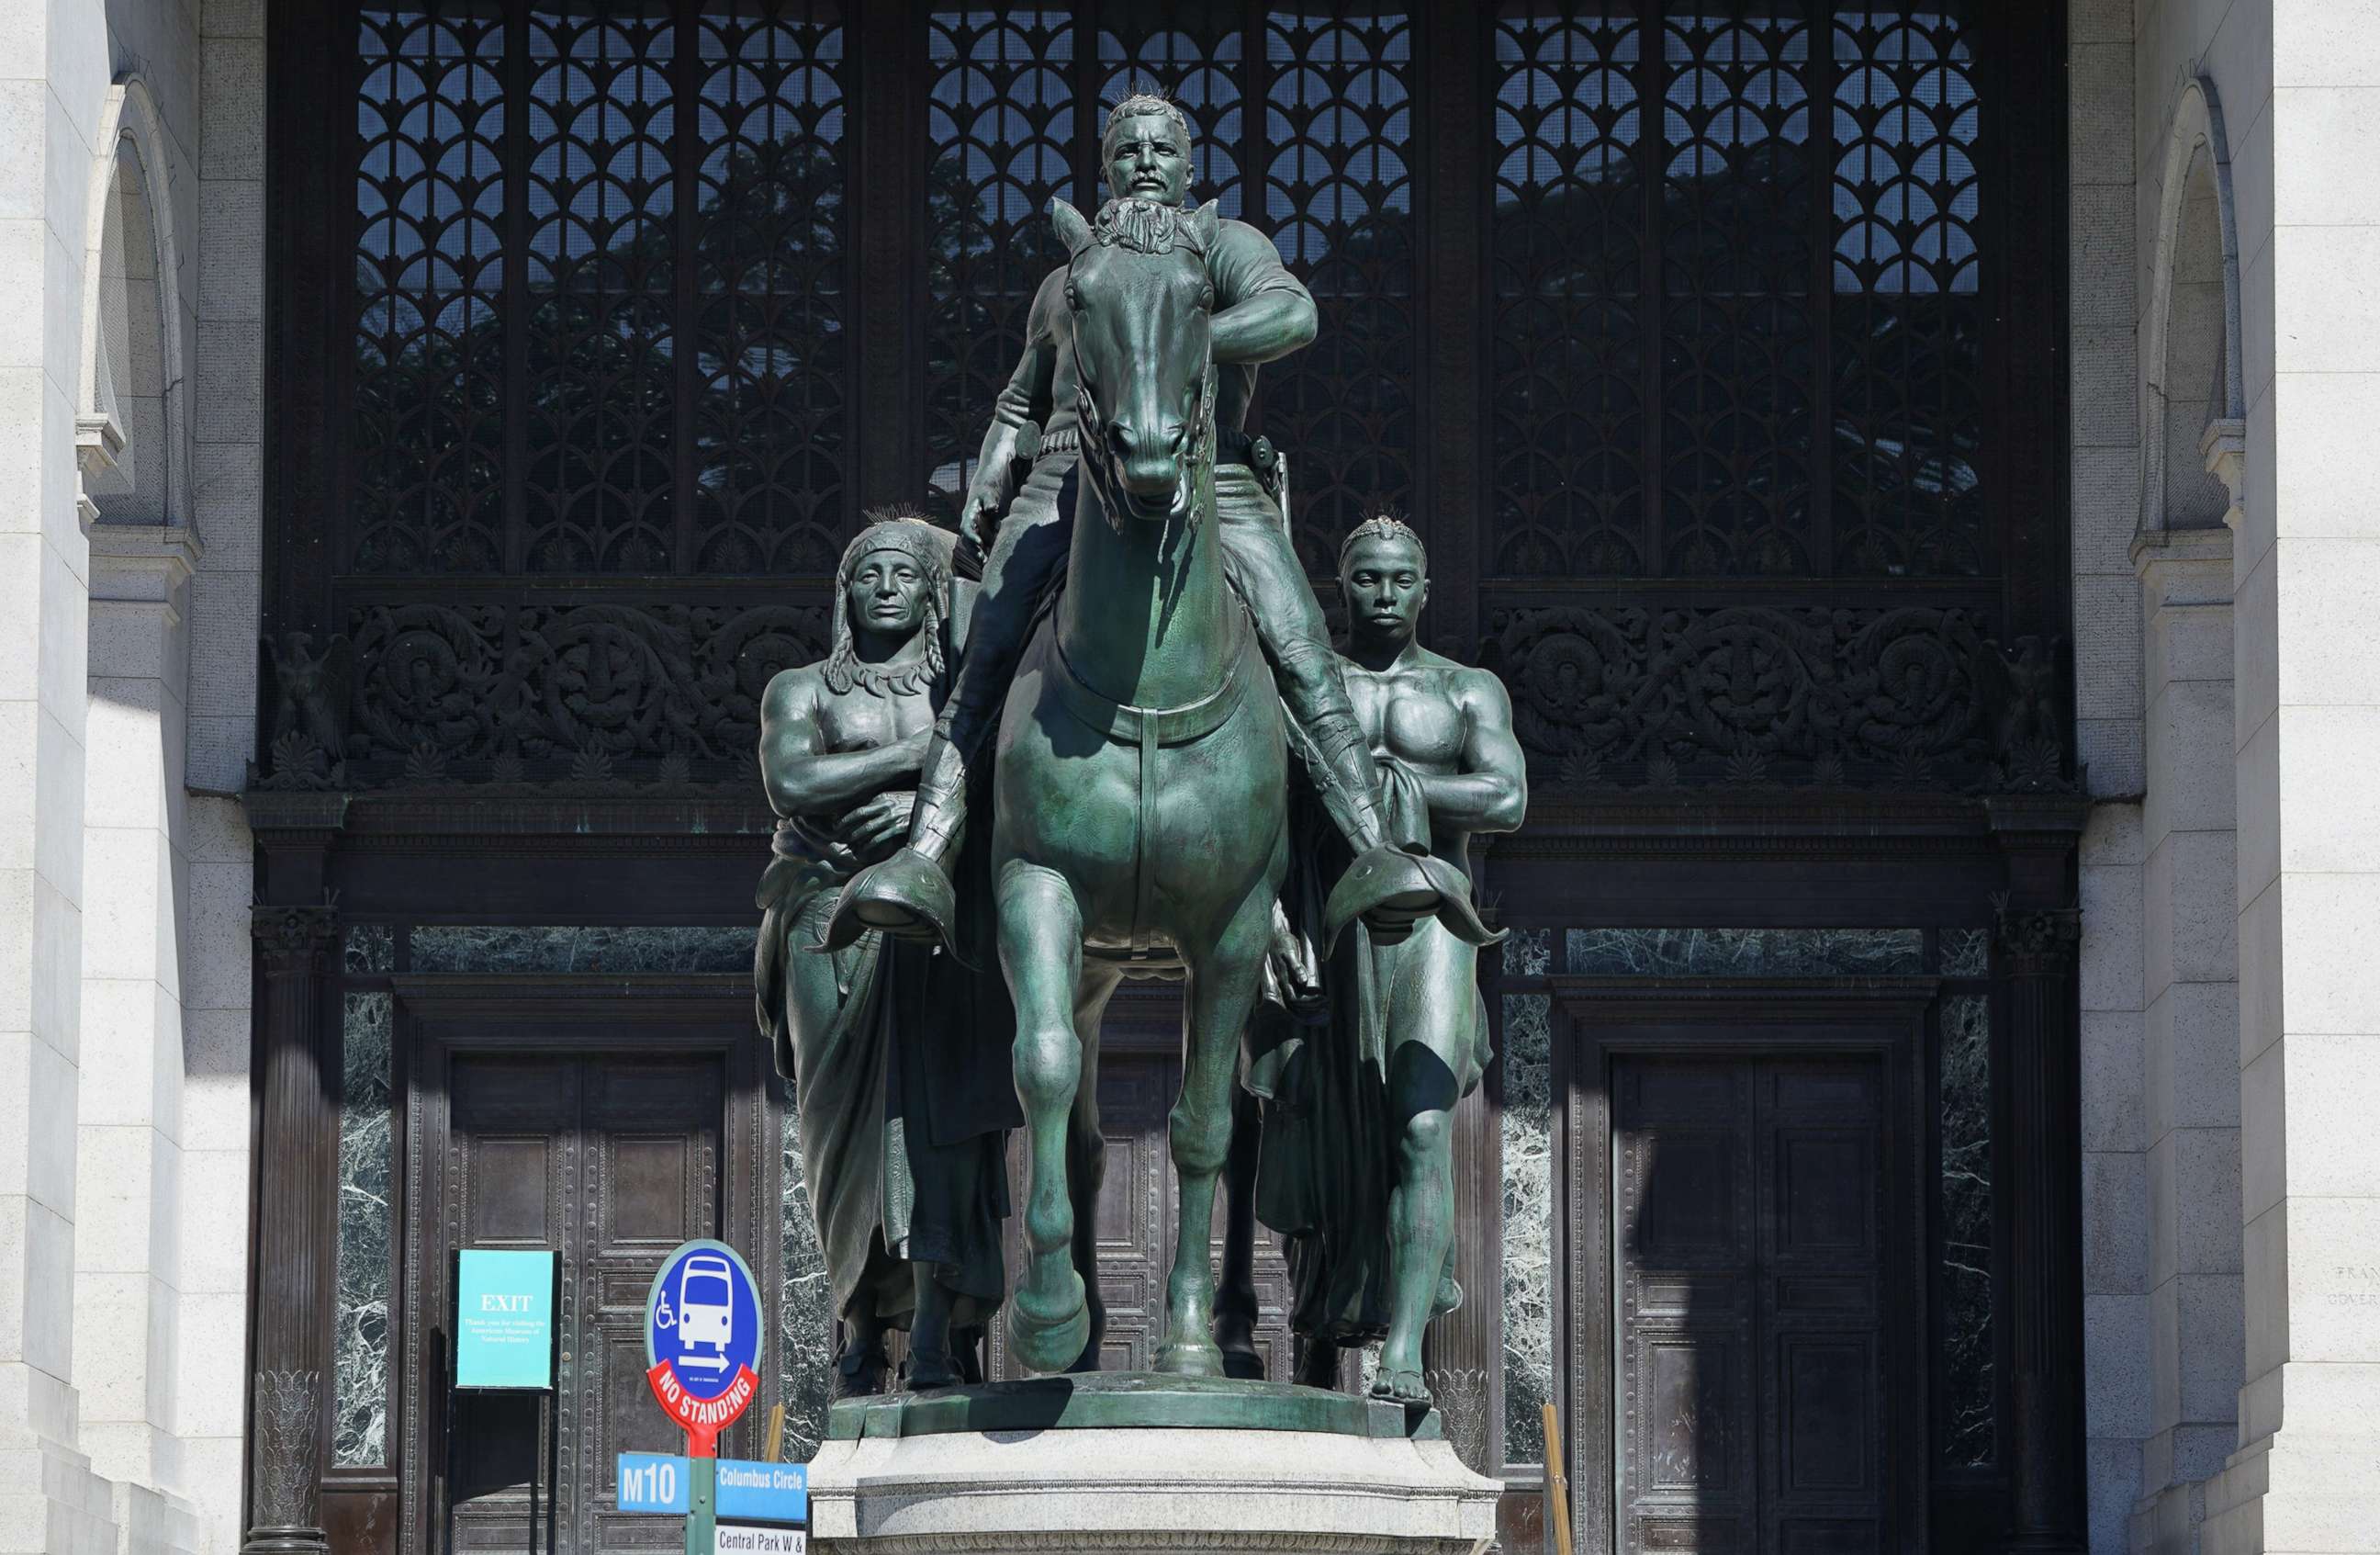 PHOTO: The Theodore Roosevelt Equestrian Statue in front of the The American Museum of Natural History on Central Park West entrance, June 22,2020.